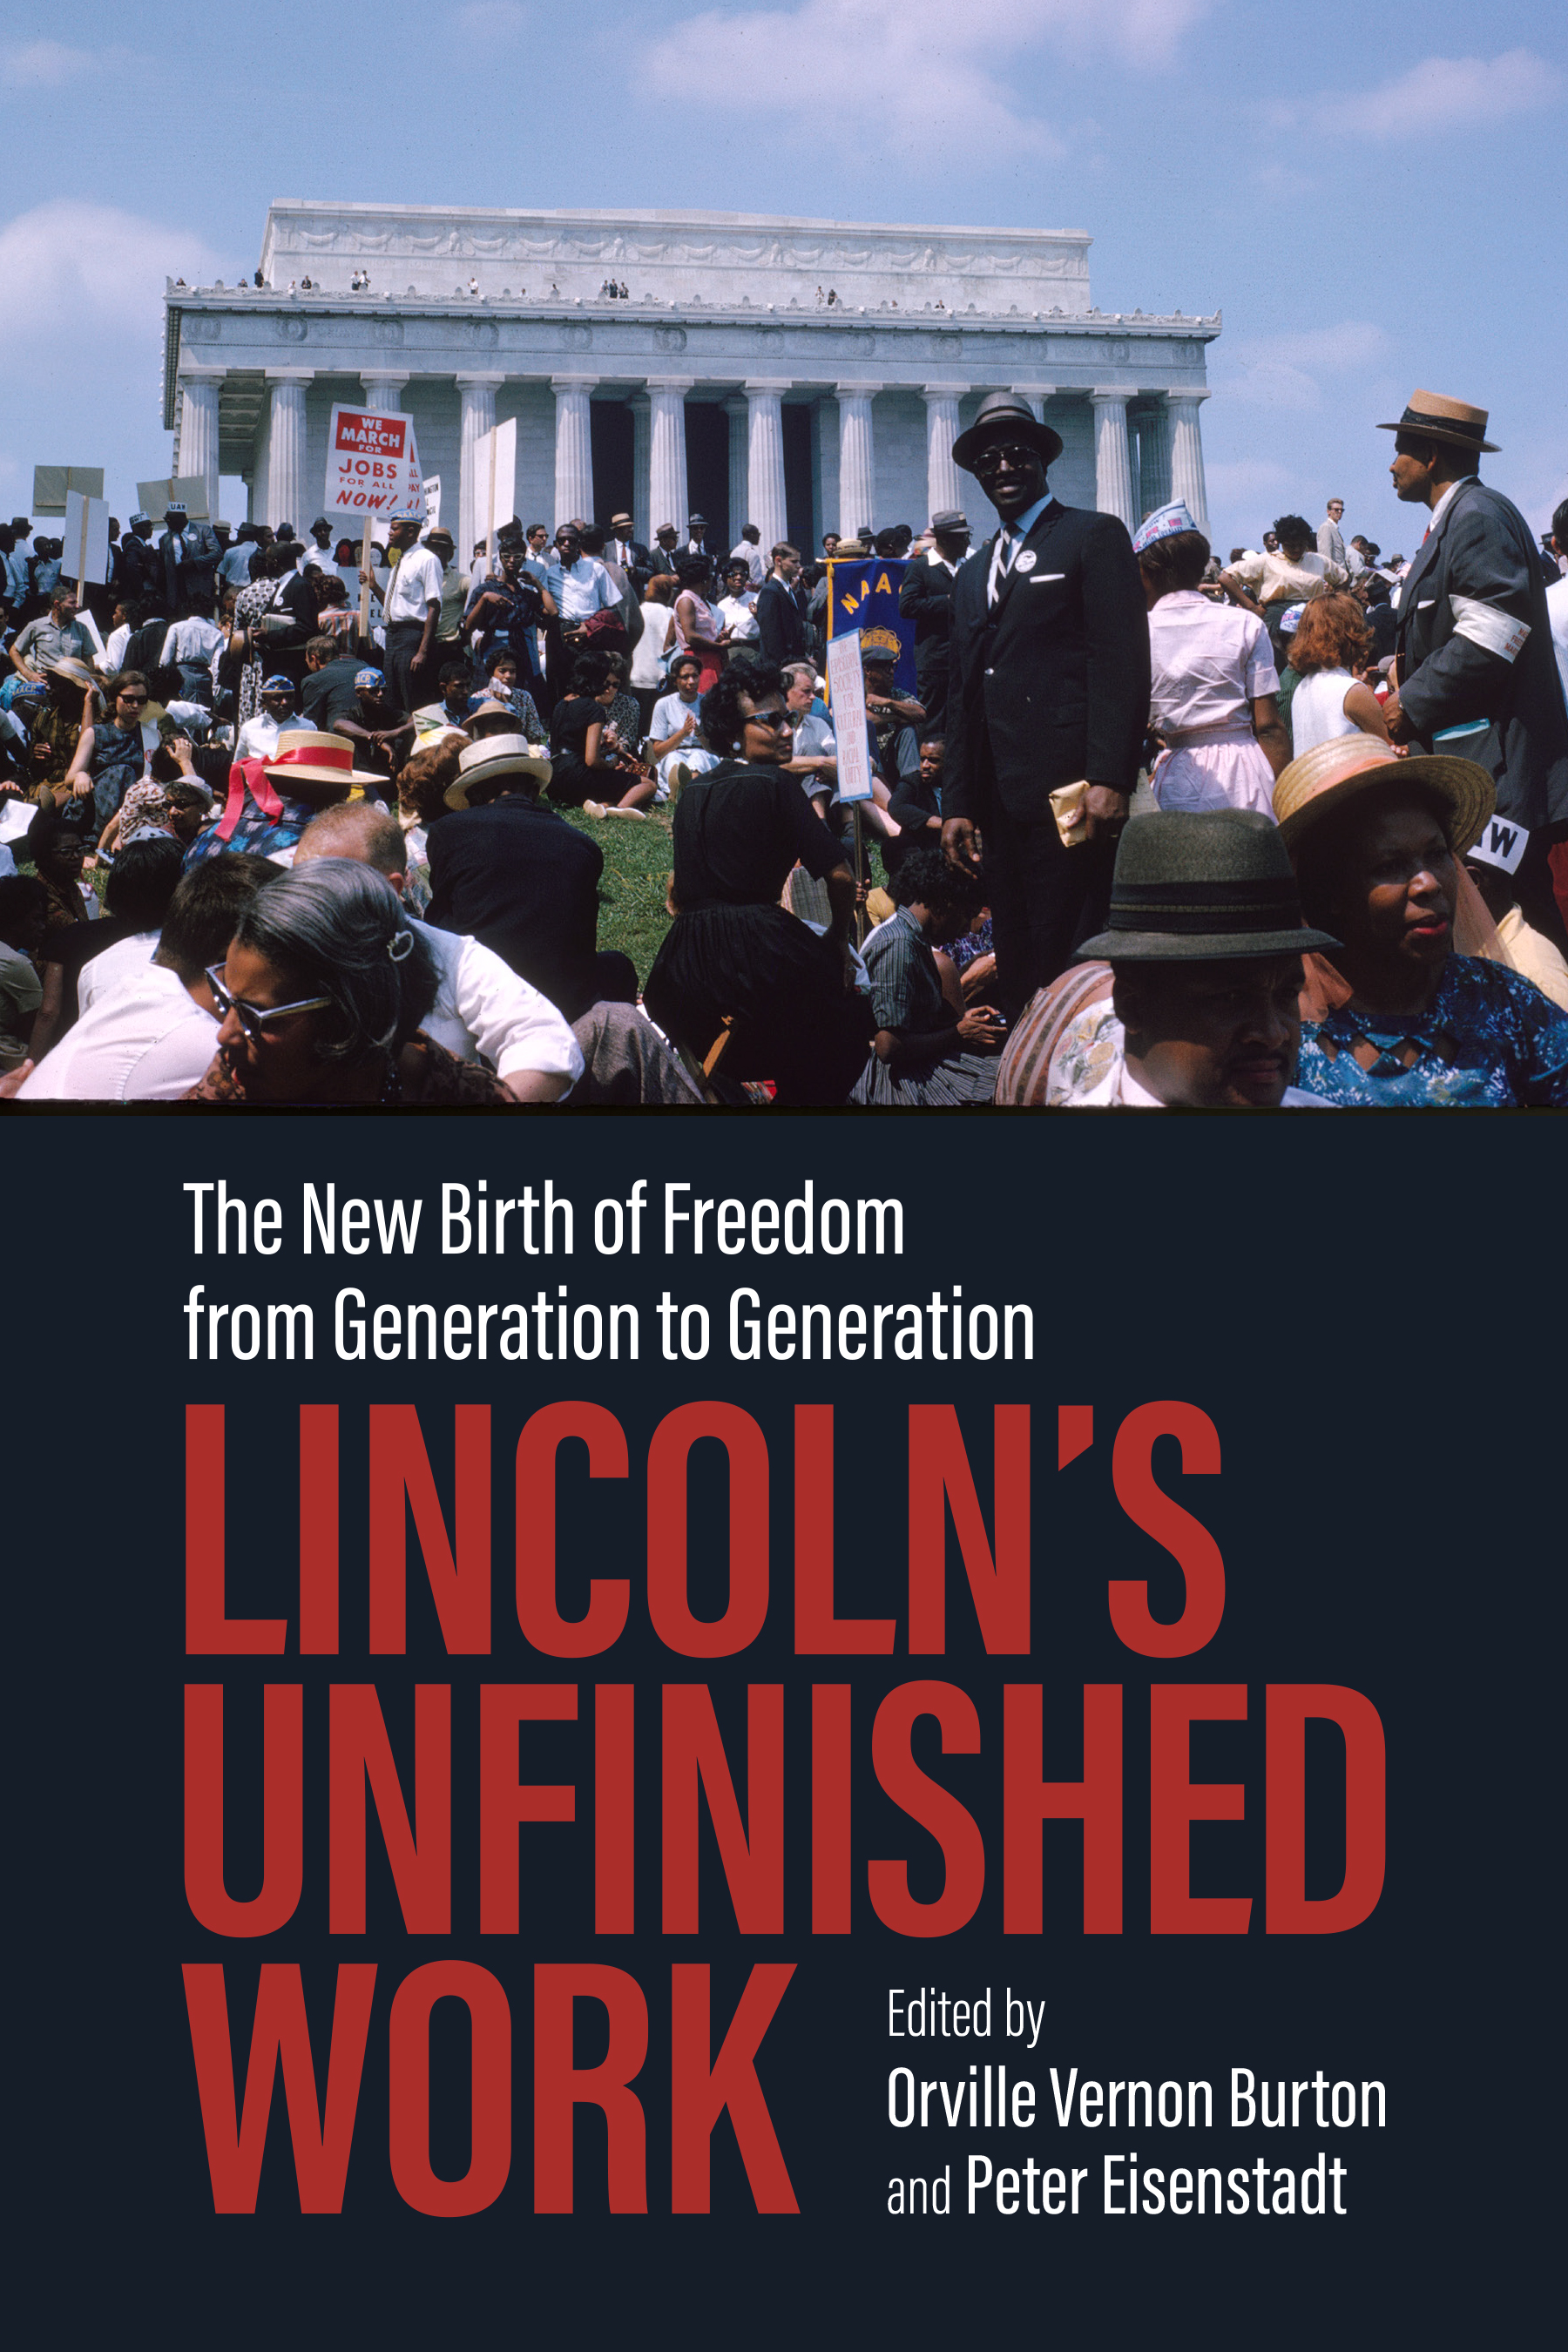 Picture of Lincoln's Unfinished Work book cover